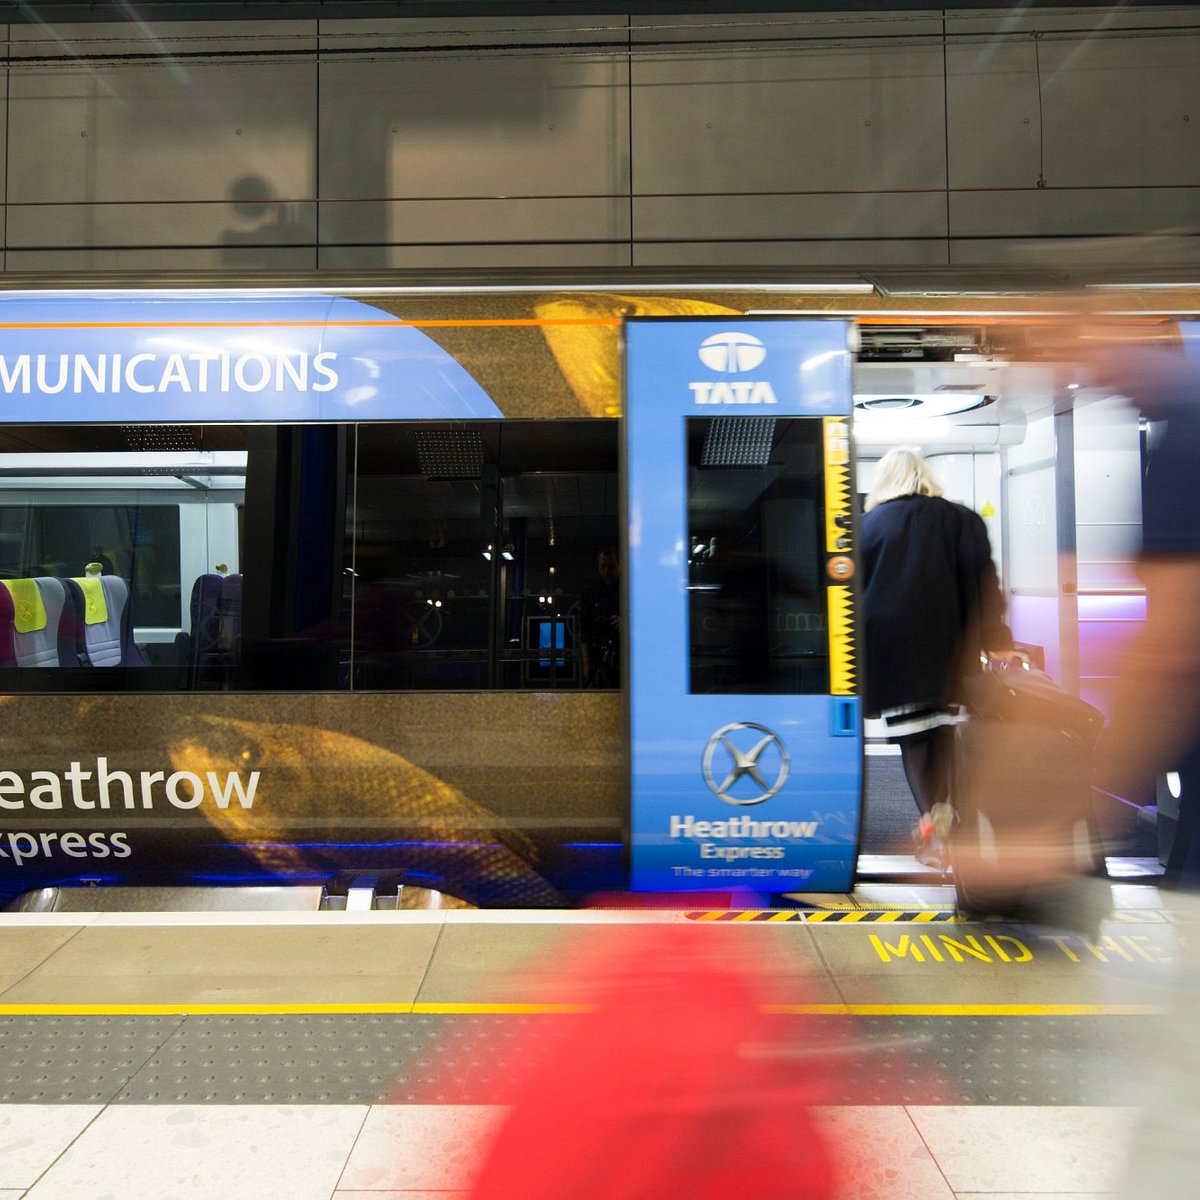 Heathrow Express (London) - You to Know BEFORE You Go